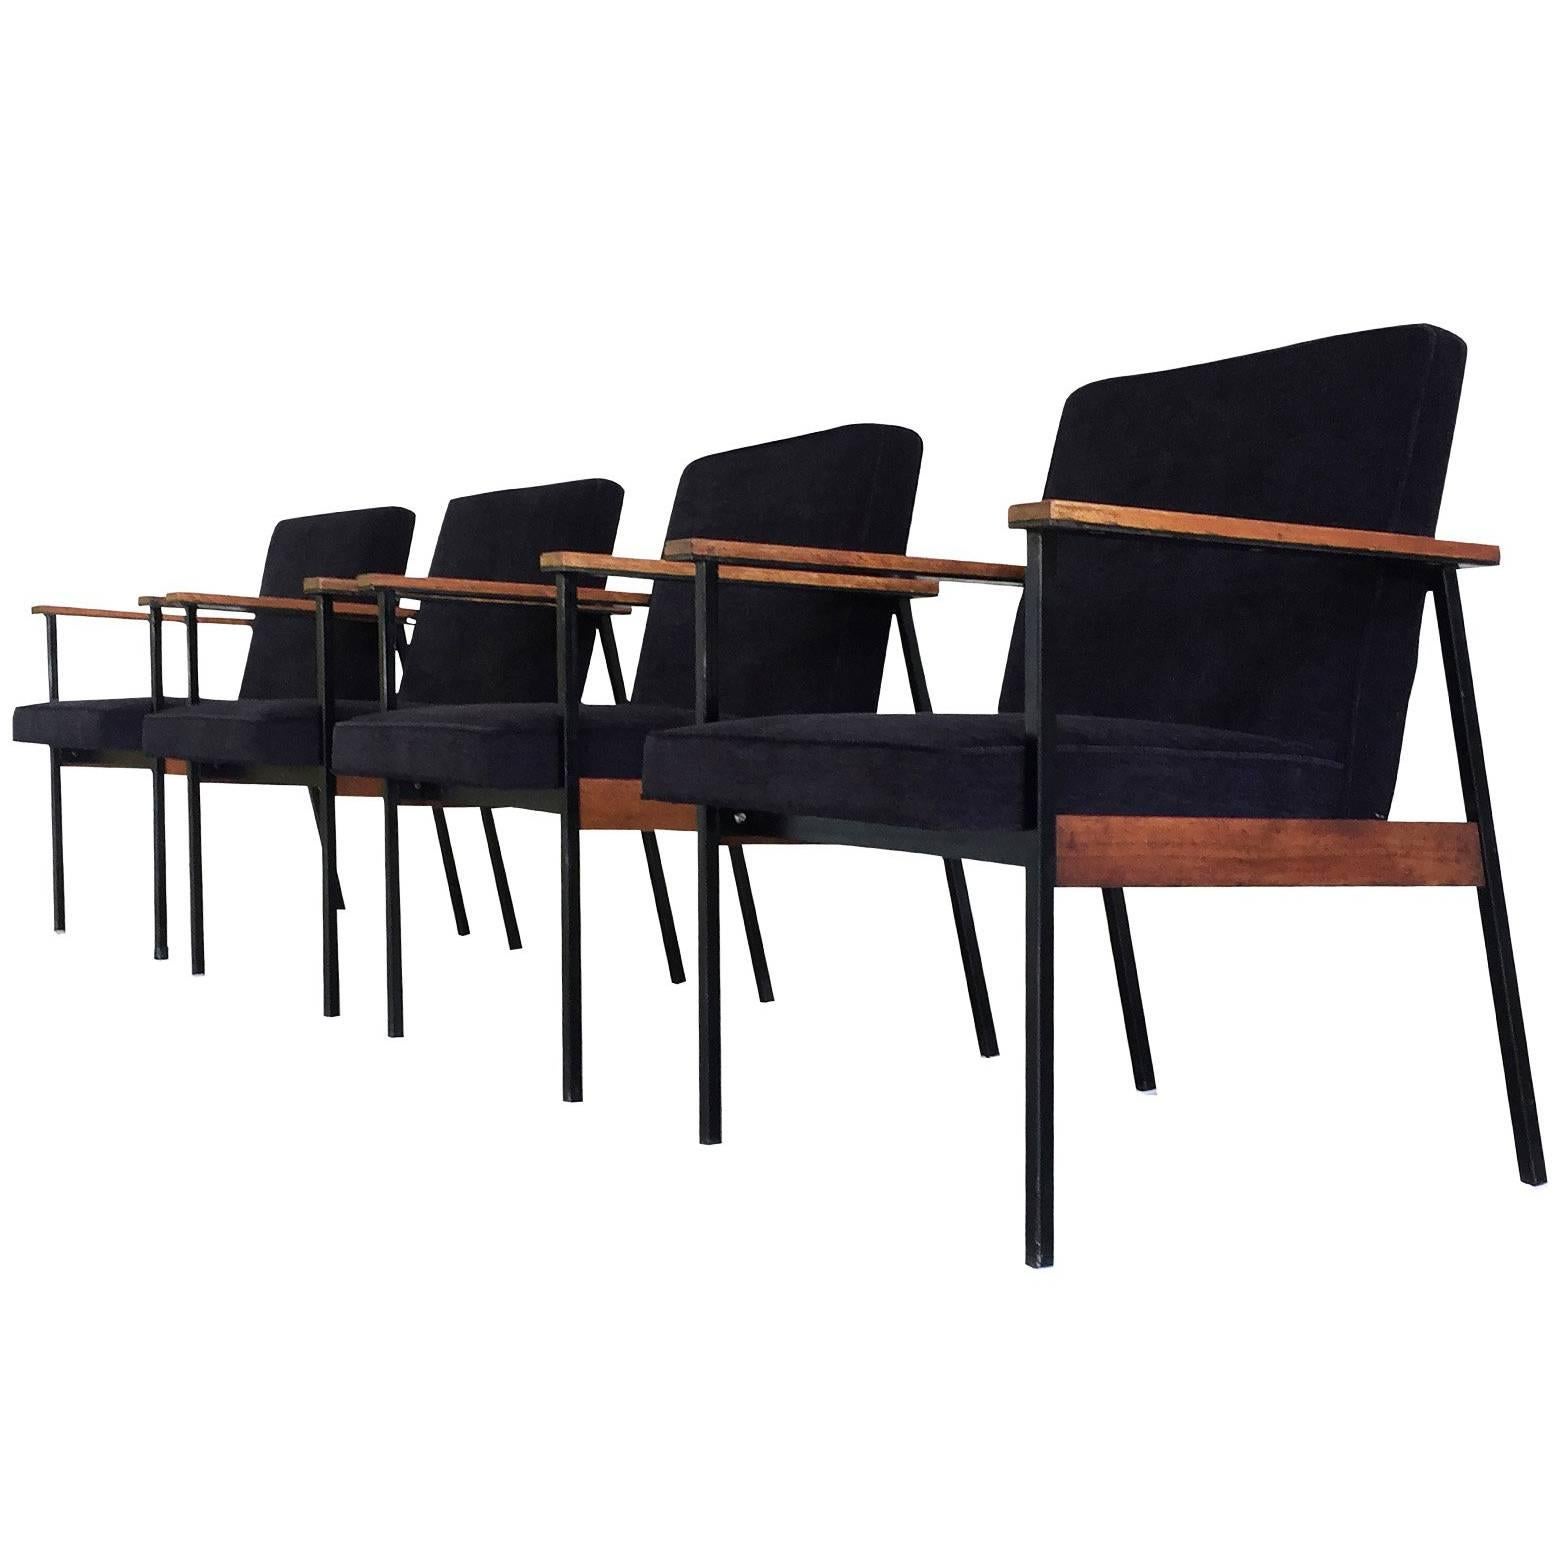 Mid-Century Modern Office Chairs Attributed to Paul McCobb, a Set of Four